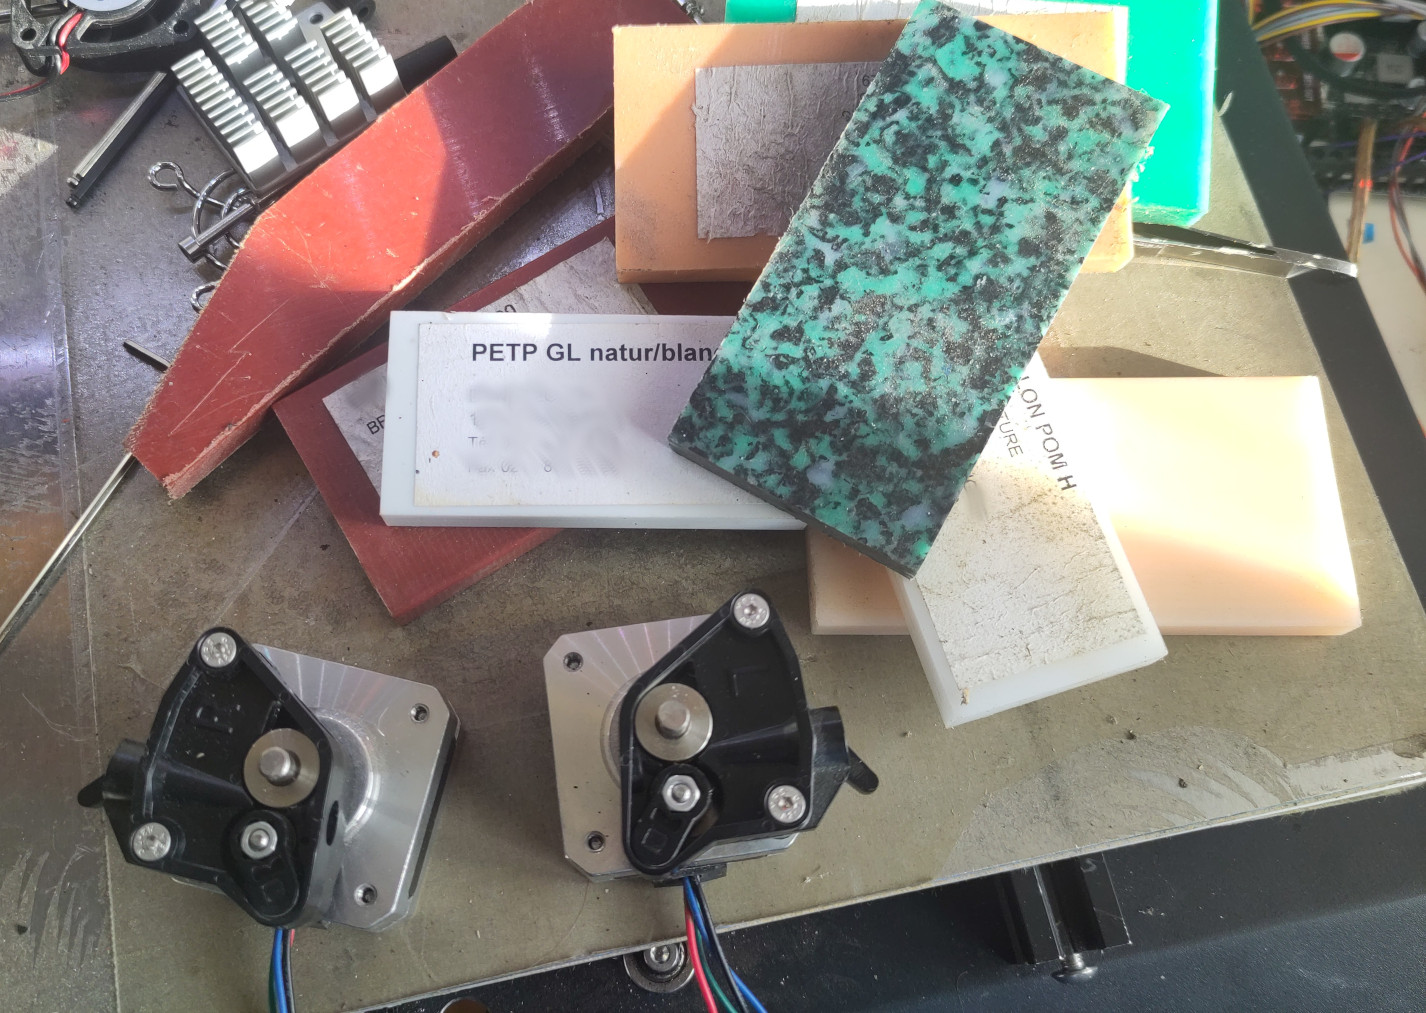 Parts for the new extruder